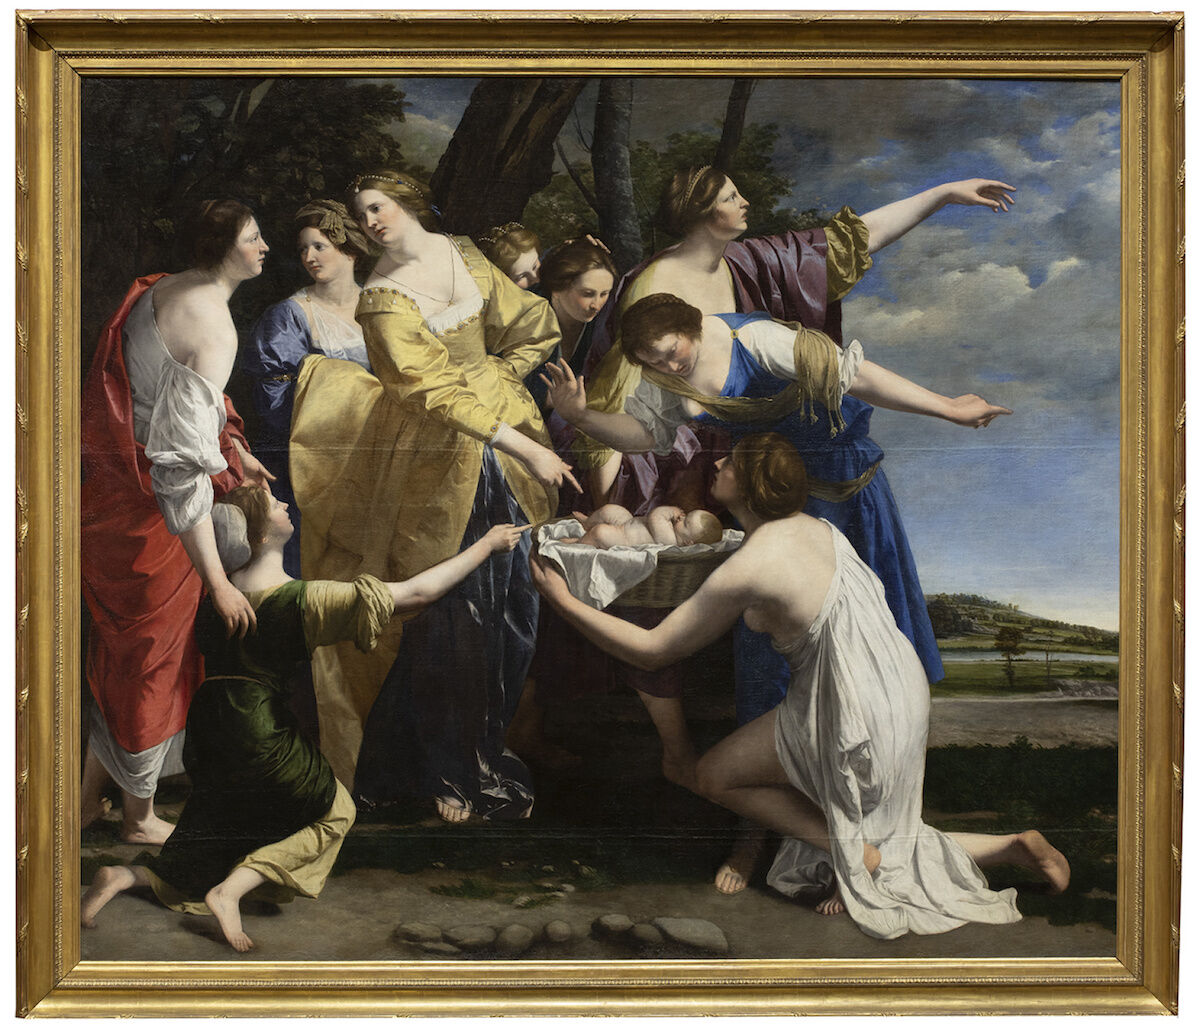 Orazio Gentileschi, The Finding of Moses, early 1630s. © Private Collection. Courtesy National Gallery, London.